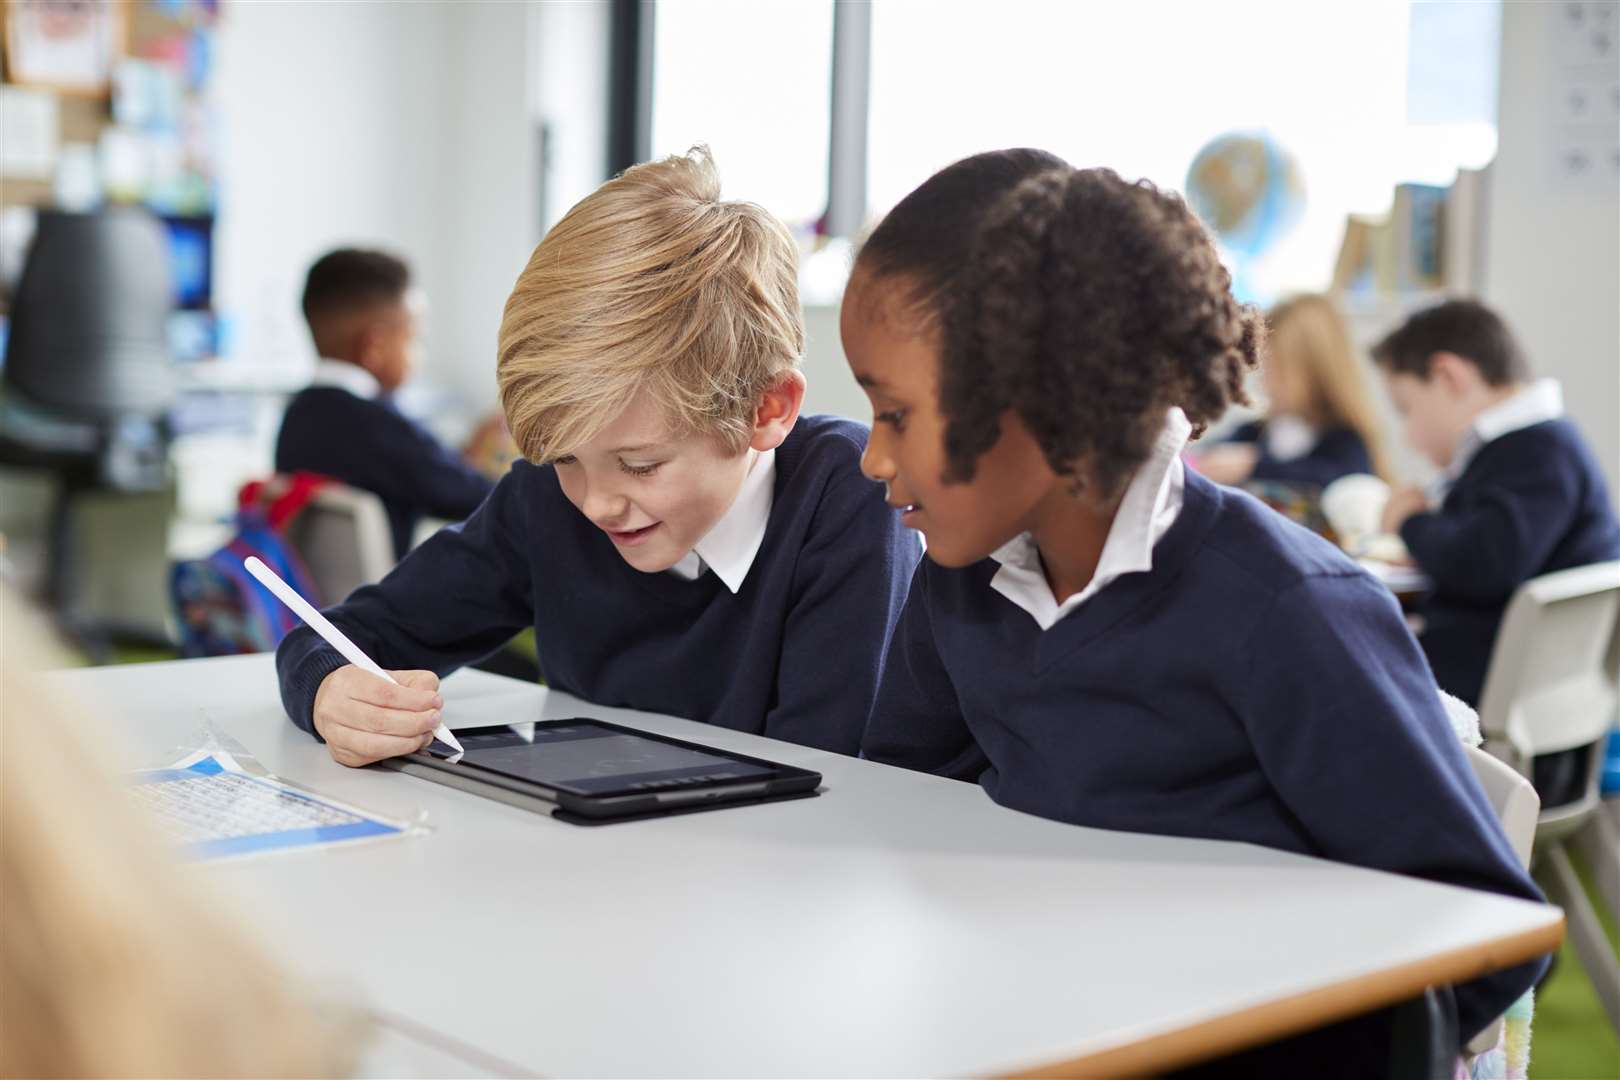 Parents should be positive about the school choice, advises one solicitor who specialises in education. Image: Stock photo.